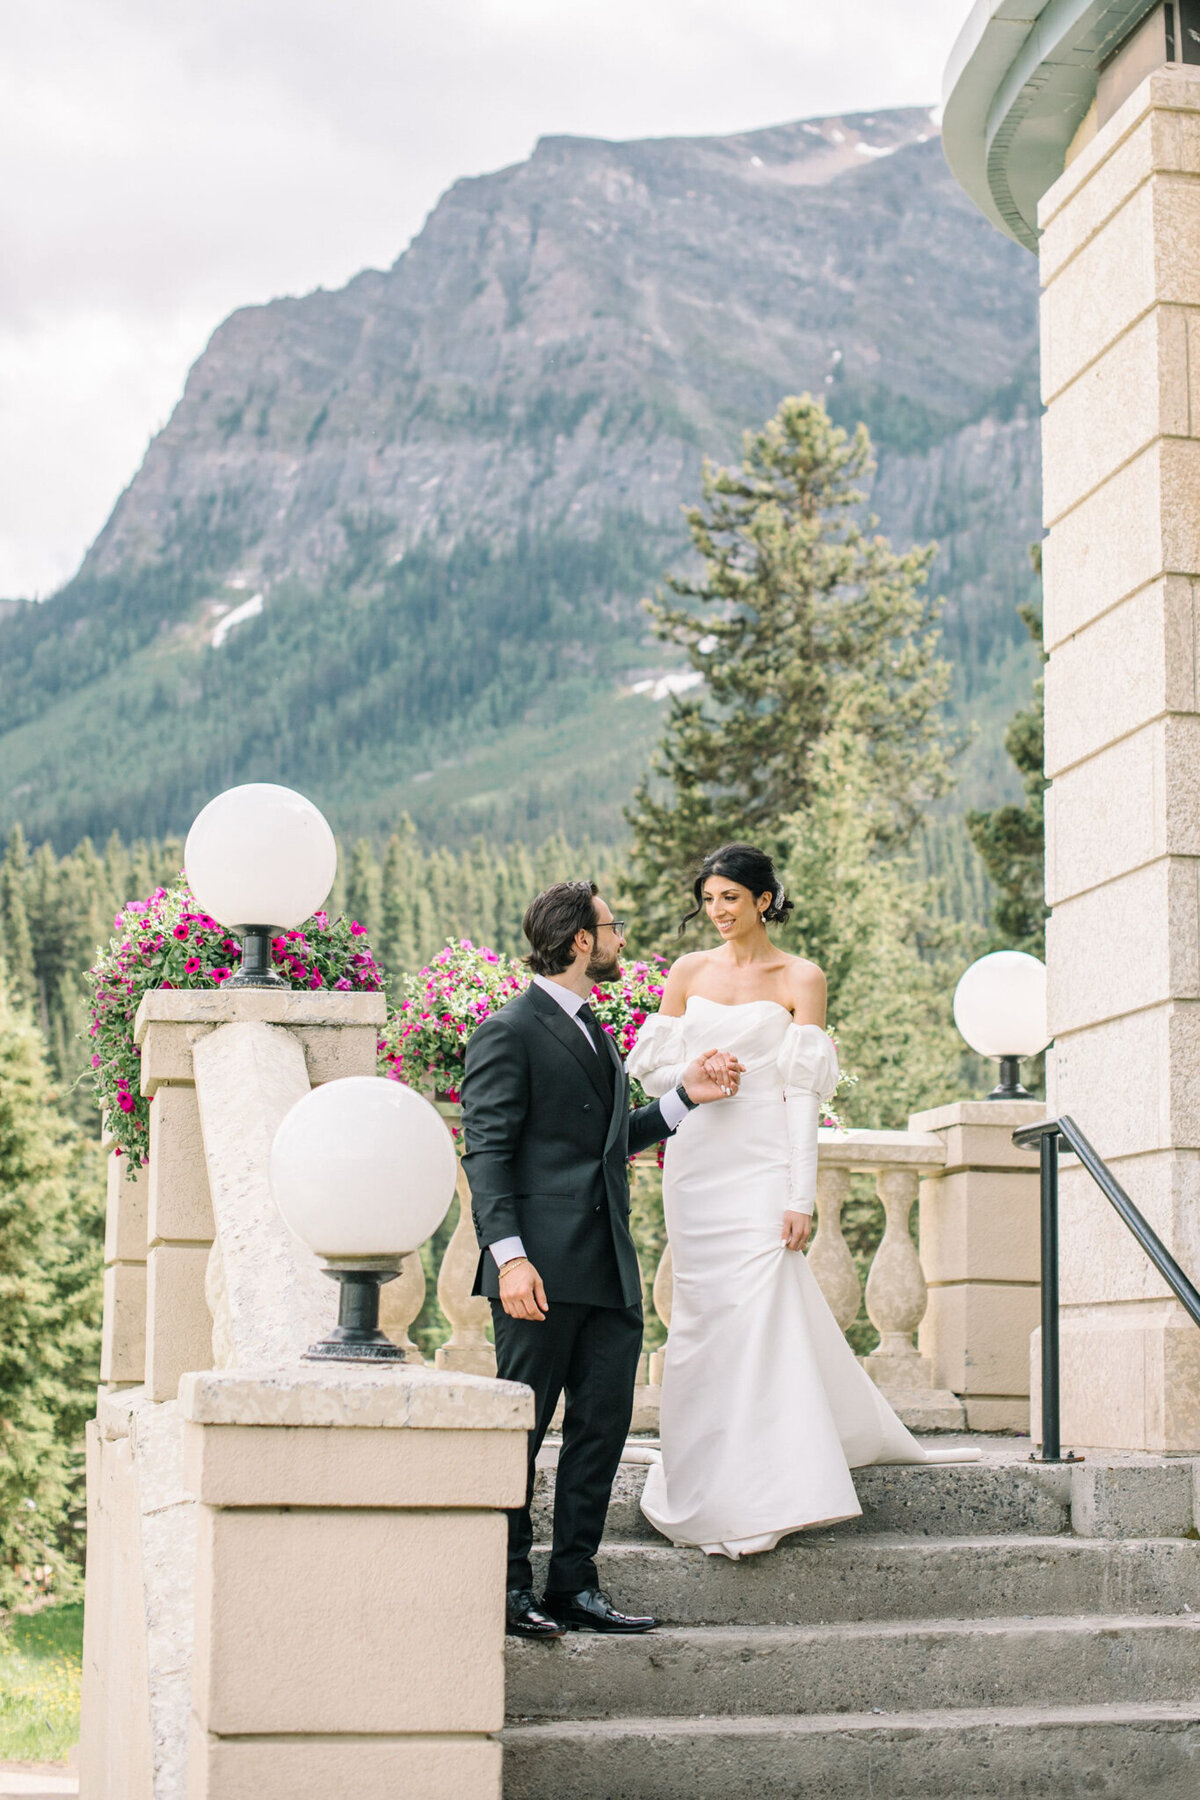 Banff, Canada wedding captured by Corrina Walker Photography, timeless and elegant wedding photographer in Calgary, Alberta. Featured on the Bronte Bride Vendor Guide.